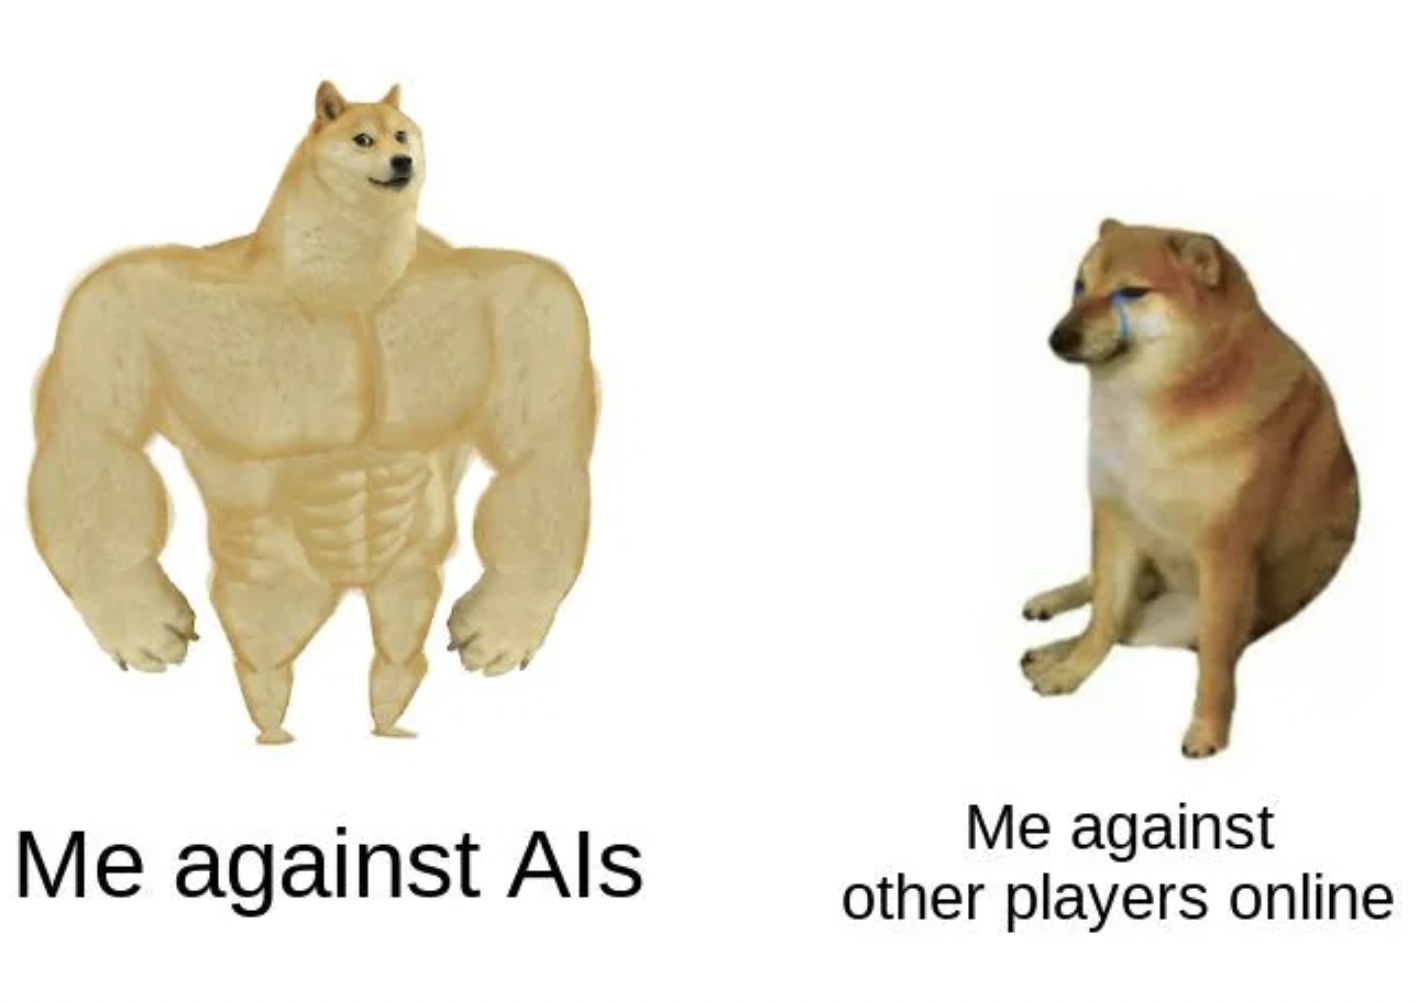 fauna - Me against Als Me against other players online